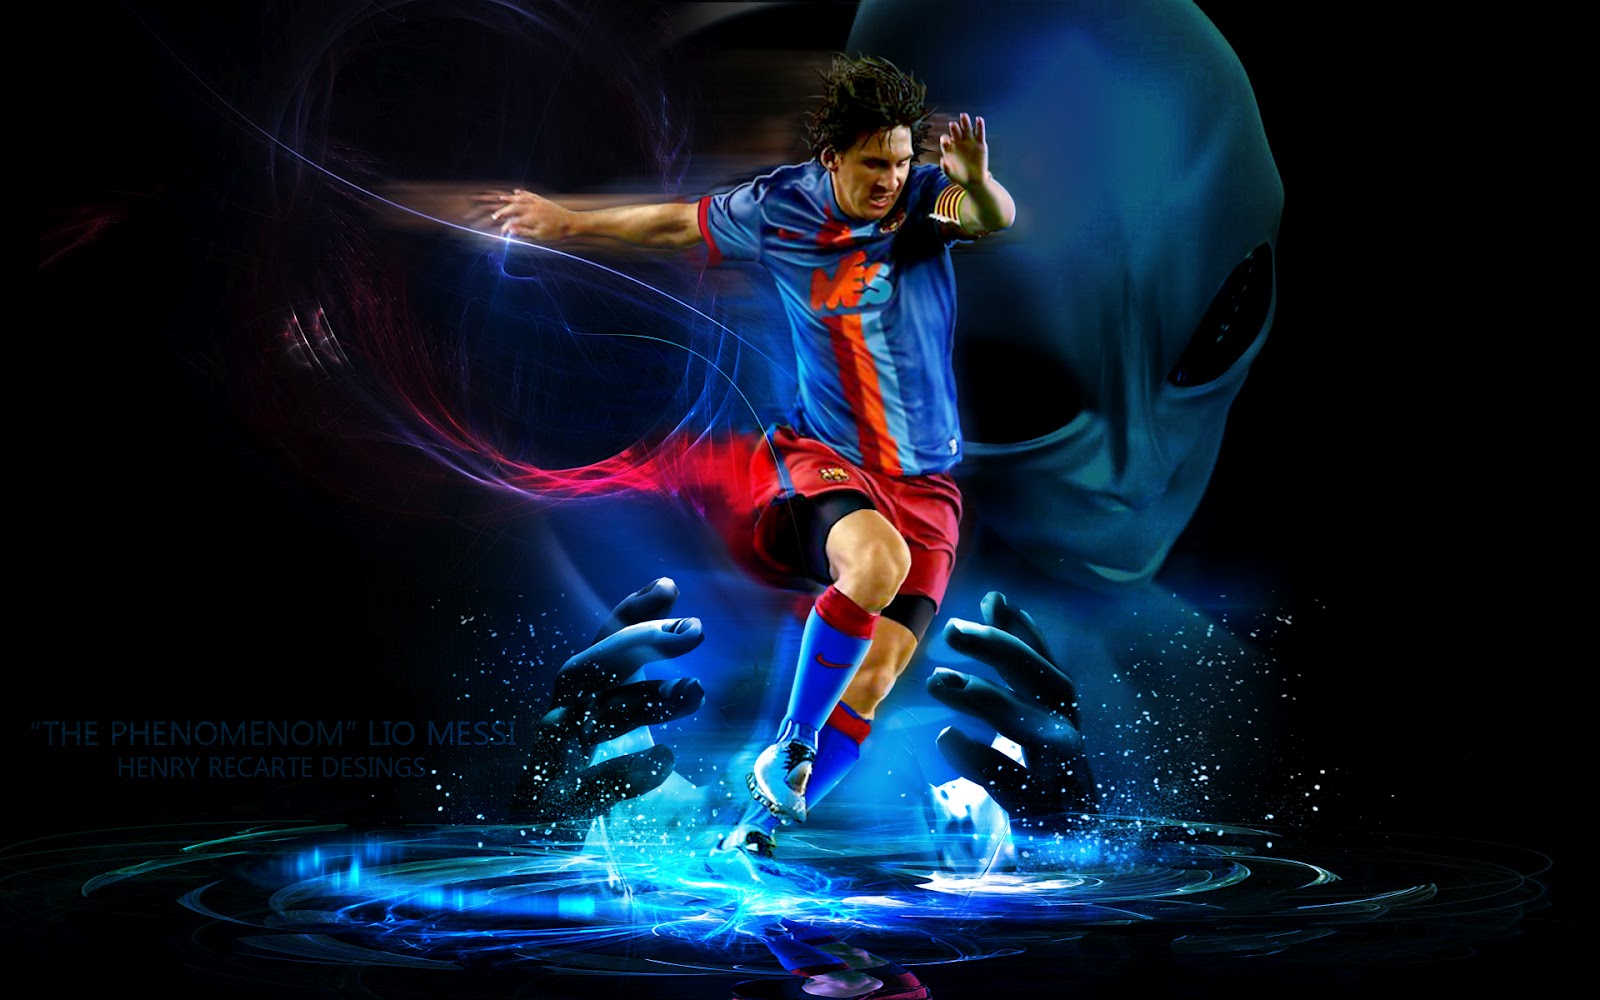 lionel messi wallpapers 2012 1024x640 lionel messi 2012 hd wallpapers 1600x1000